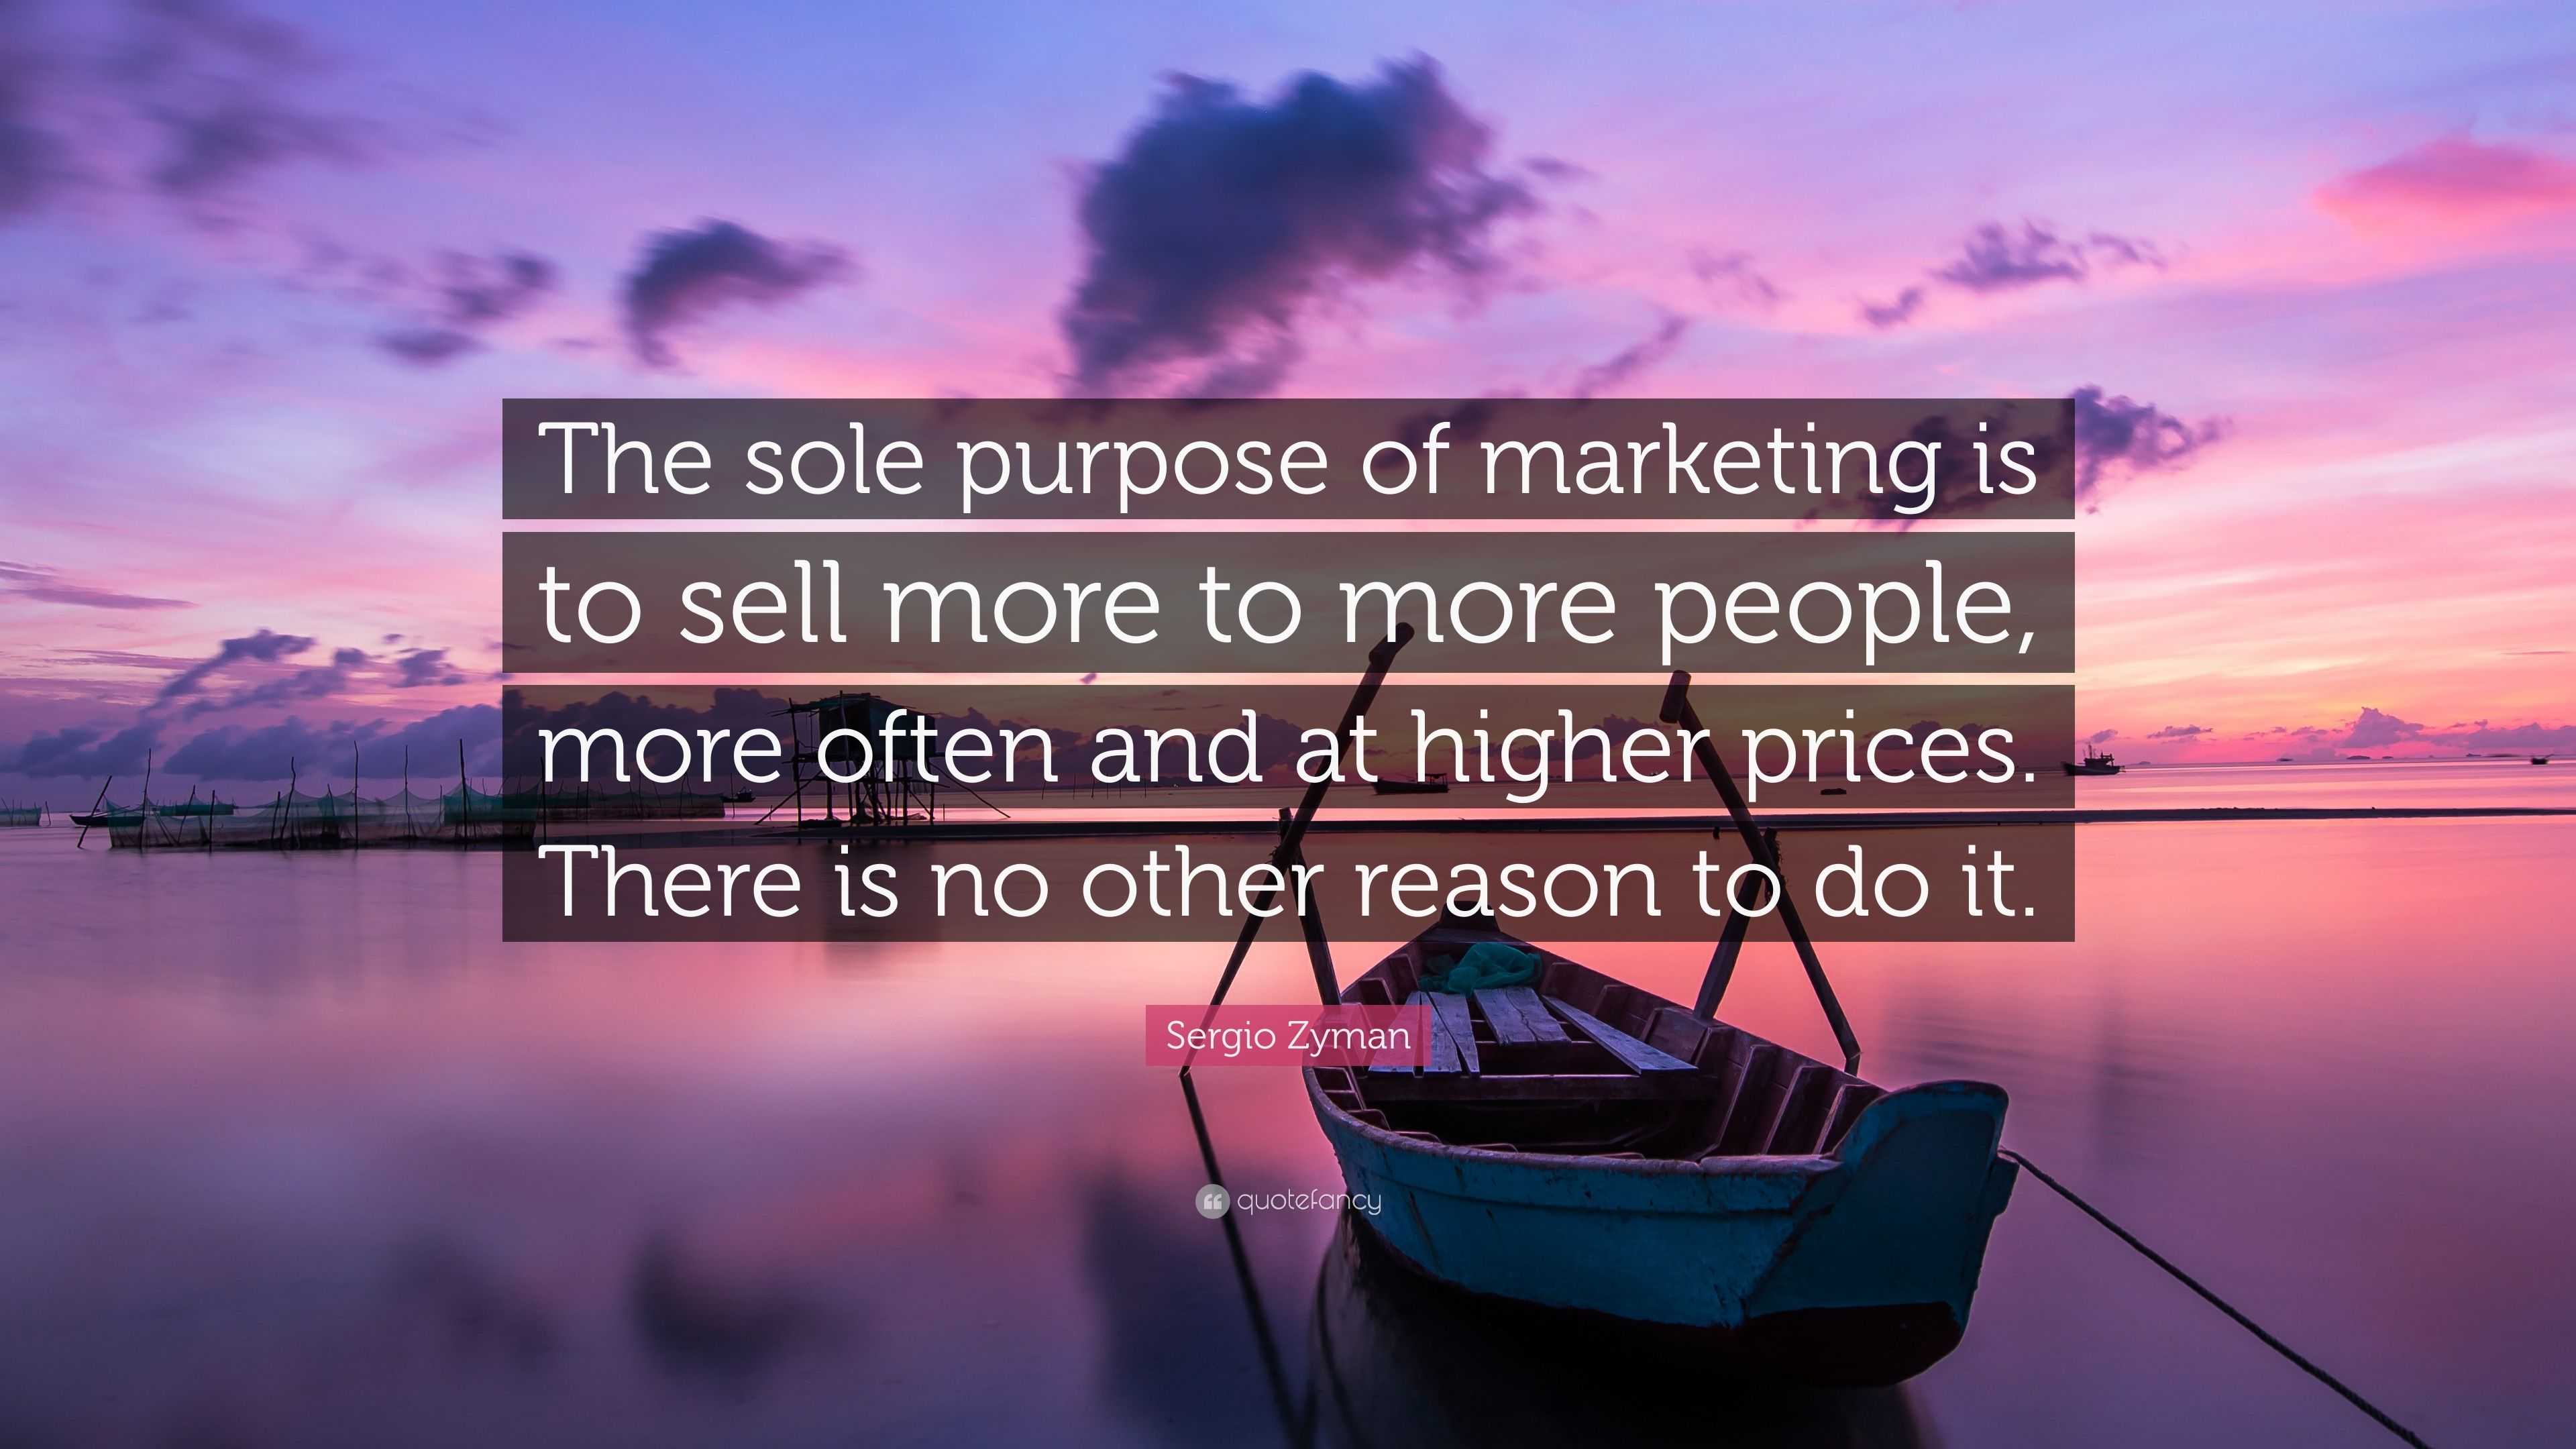 Sergio Zyman Quote: "The sole purpose of marketing is to ...